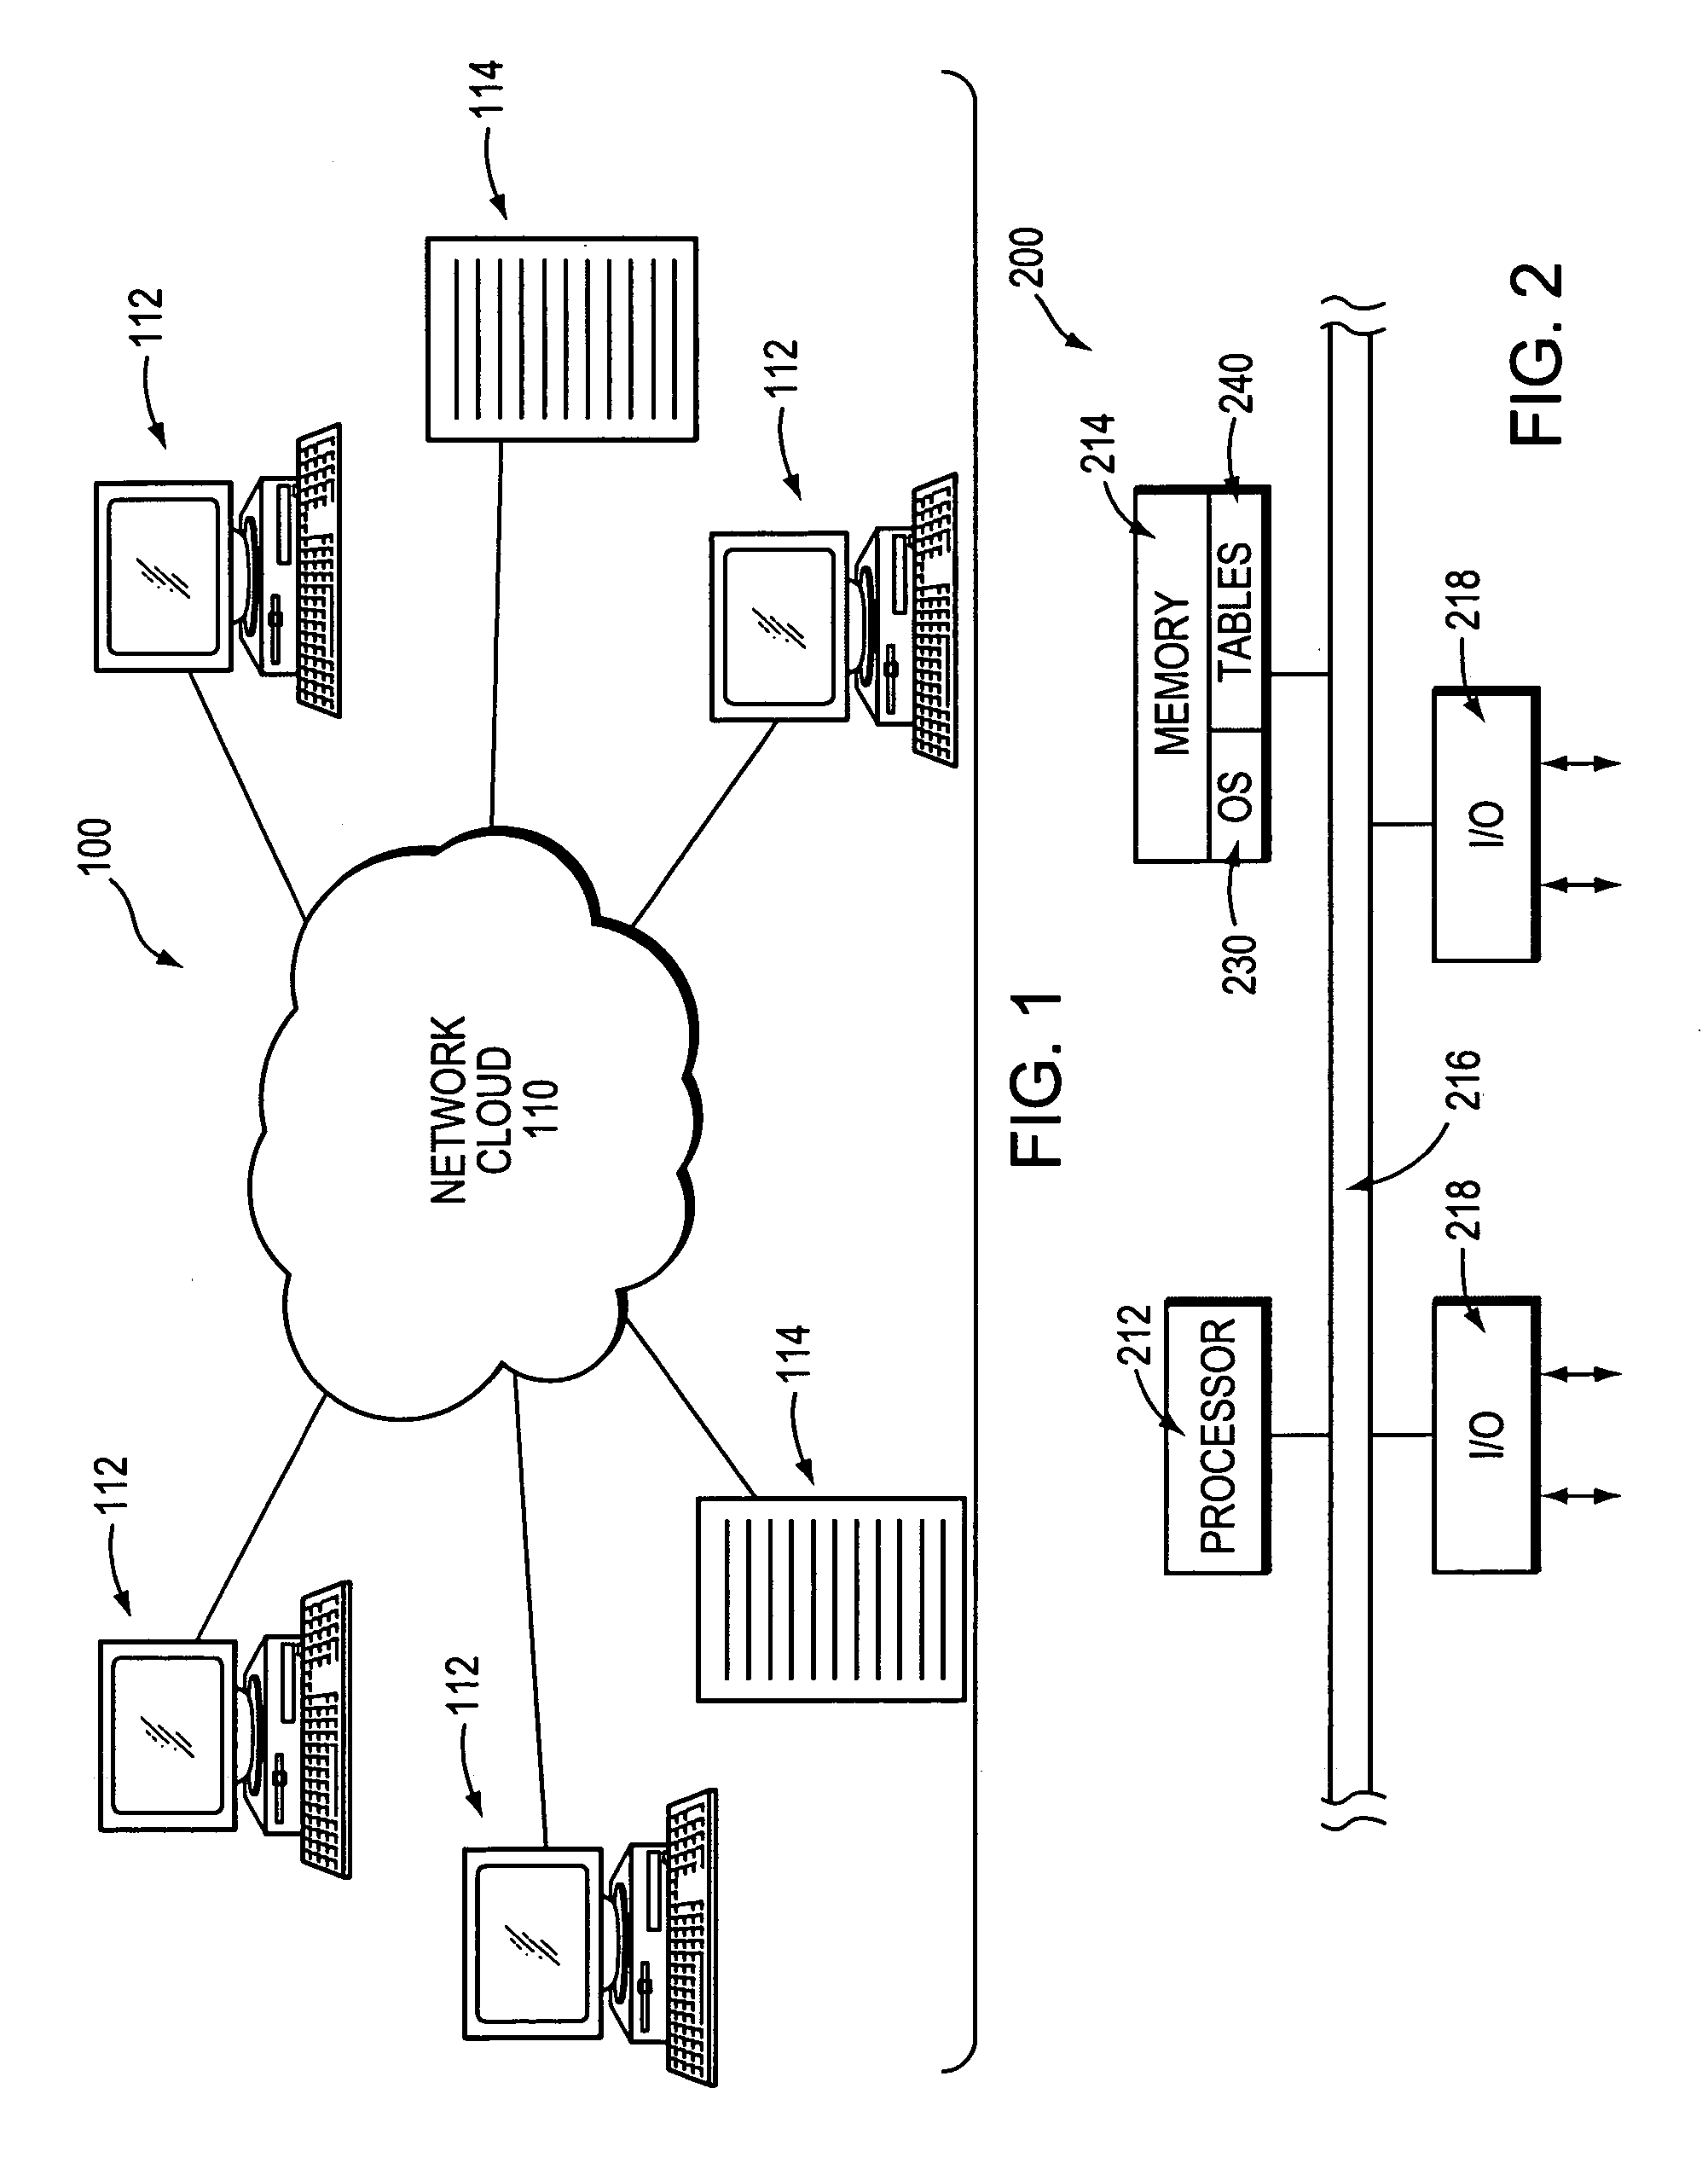 Method for high speed packet classification